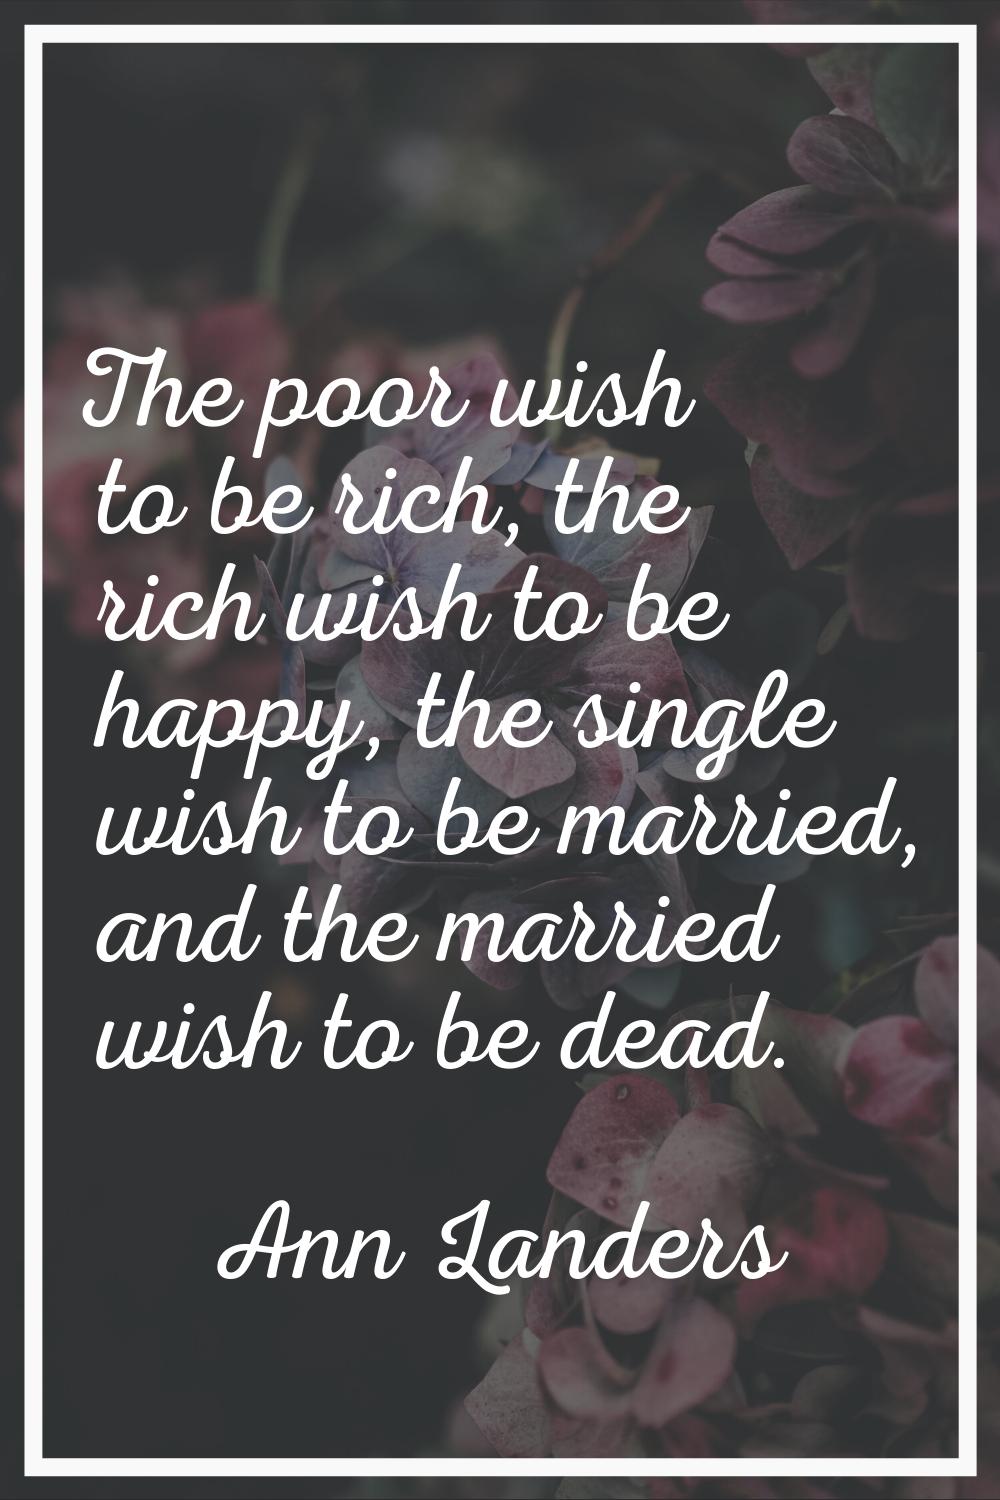 The poor wish to be rich, the rich wish to be happy, the single wish to be married, and the married